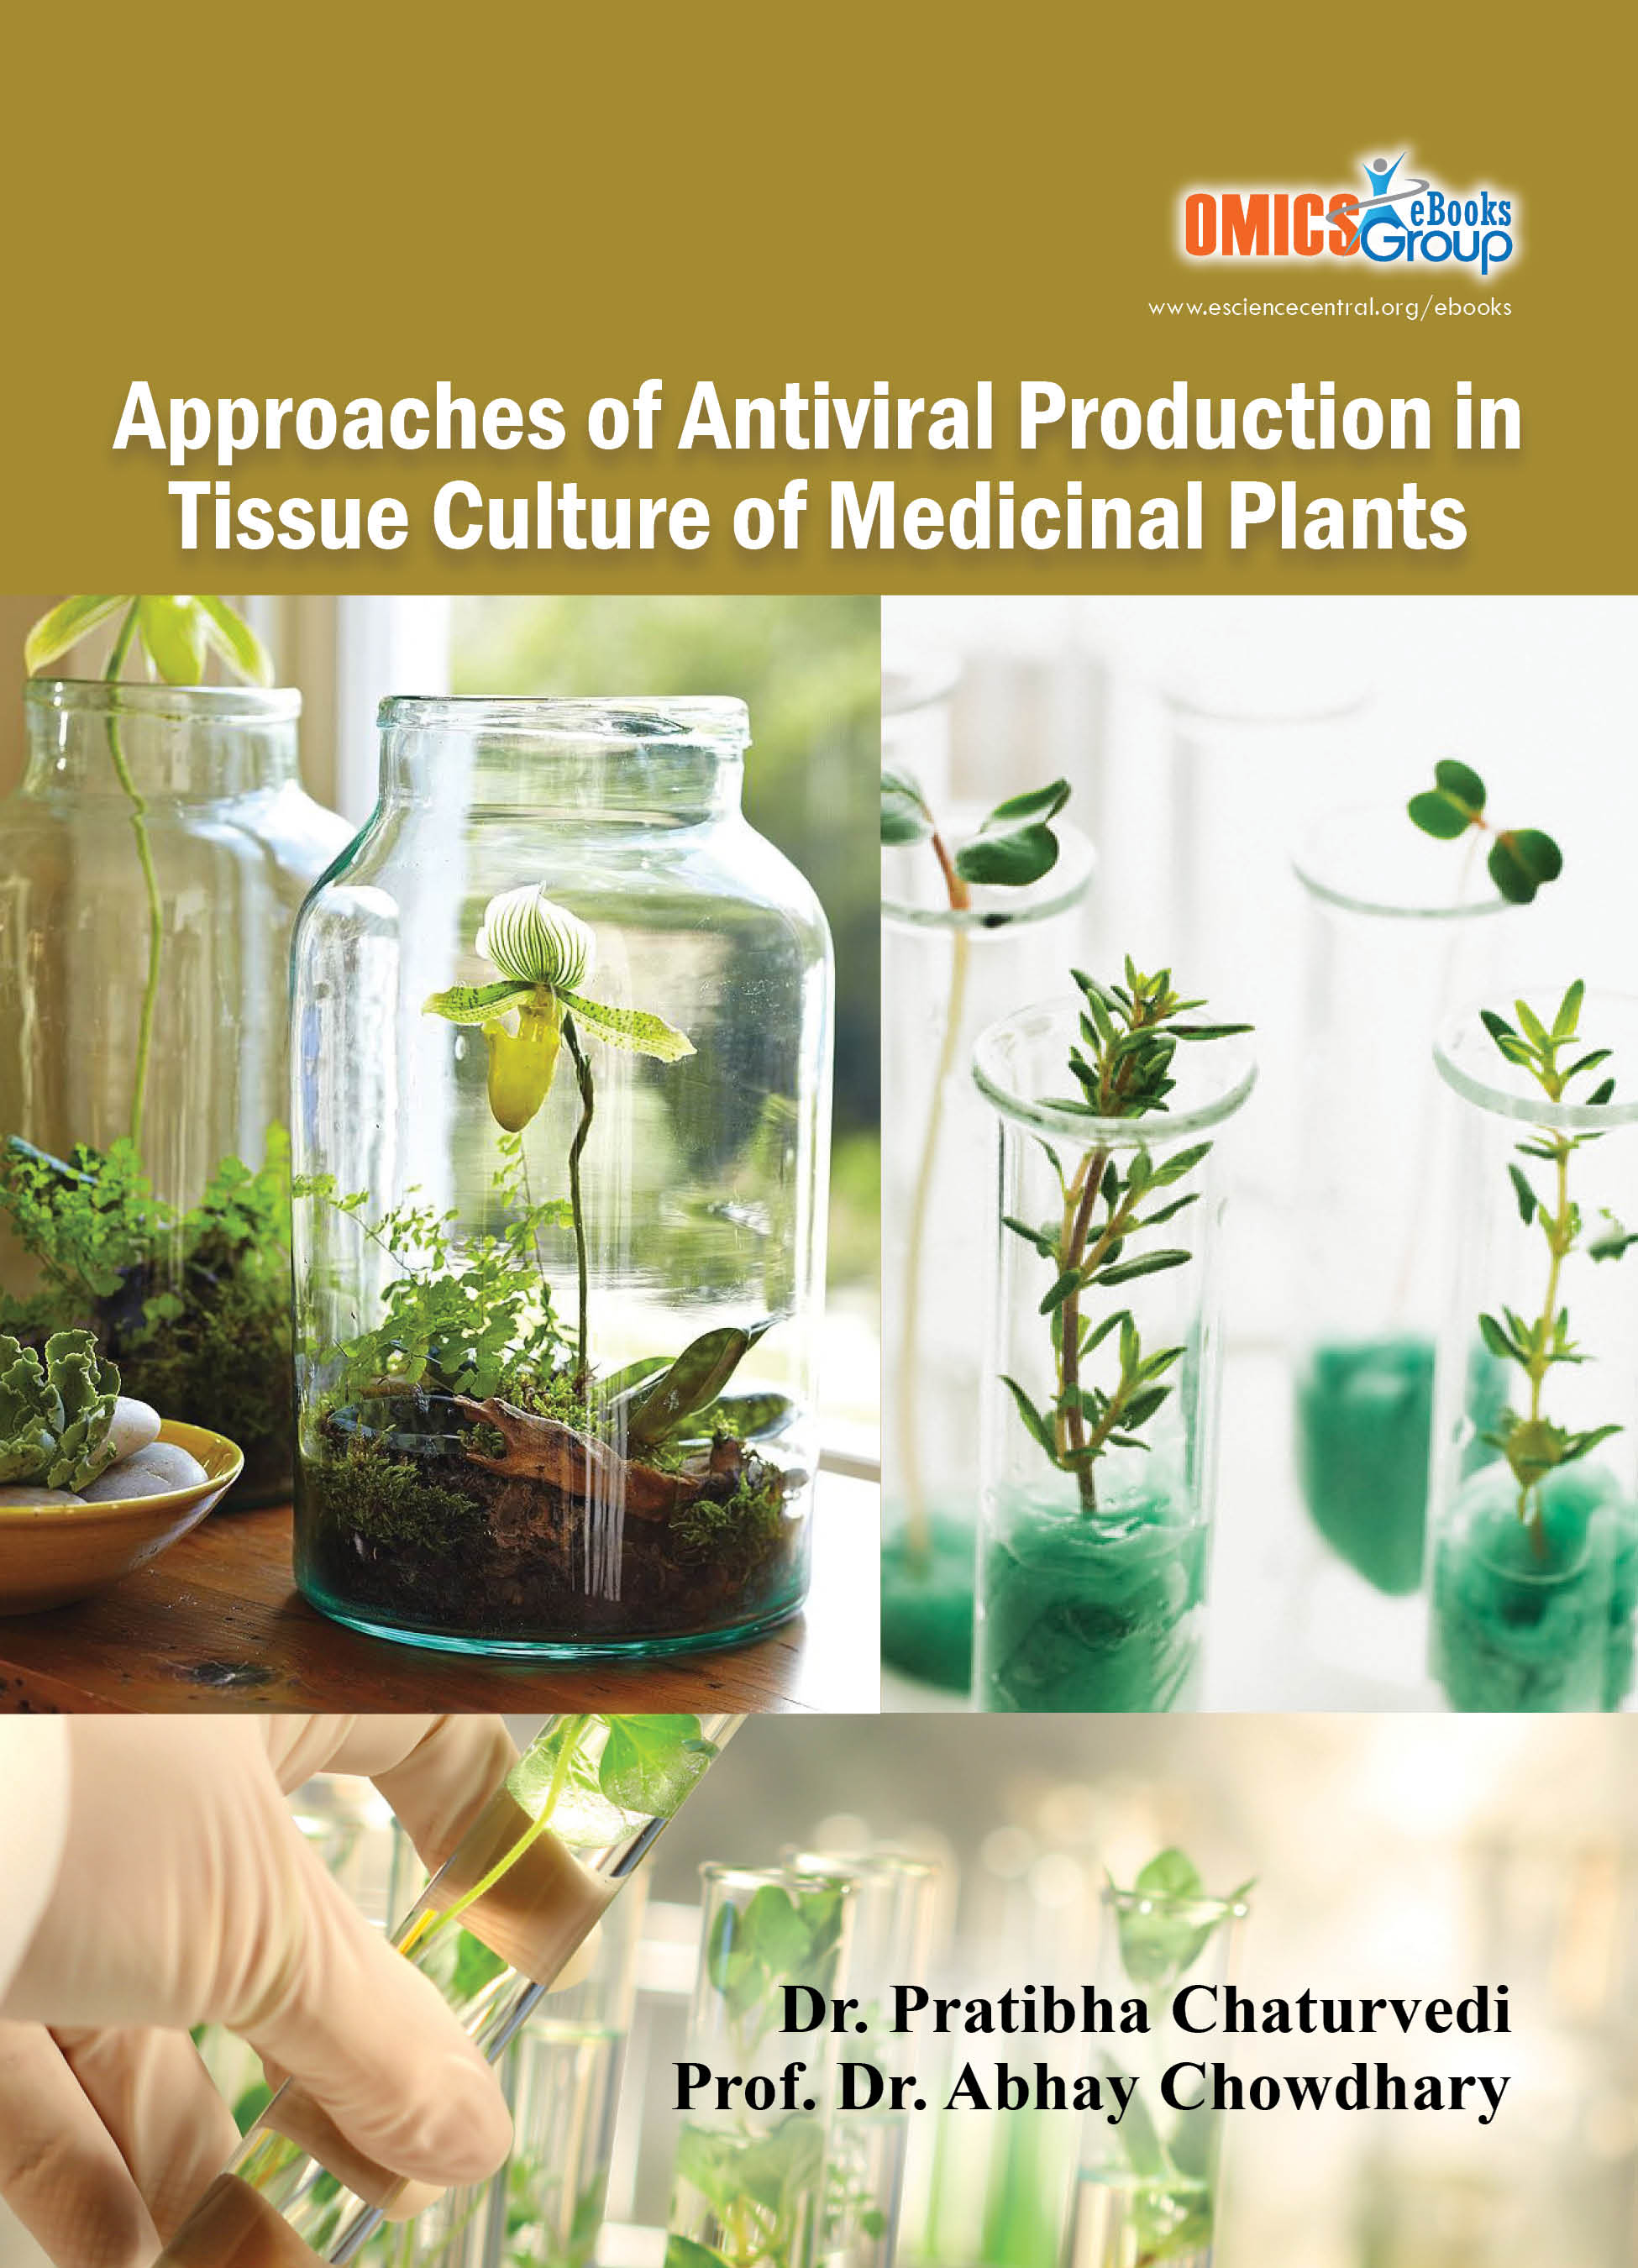 Approaches of Antiviral Production in Tissue Culture of Medicinal Plants